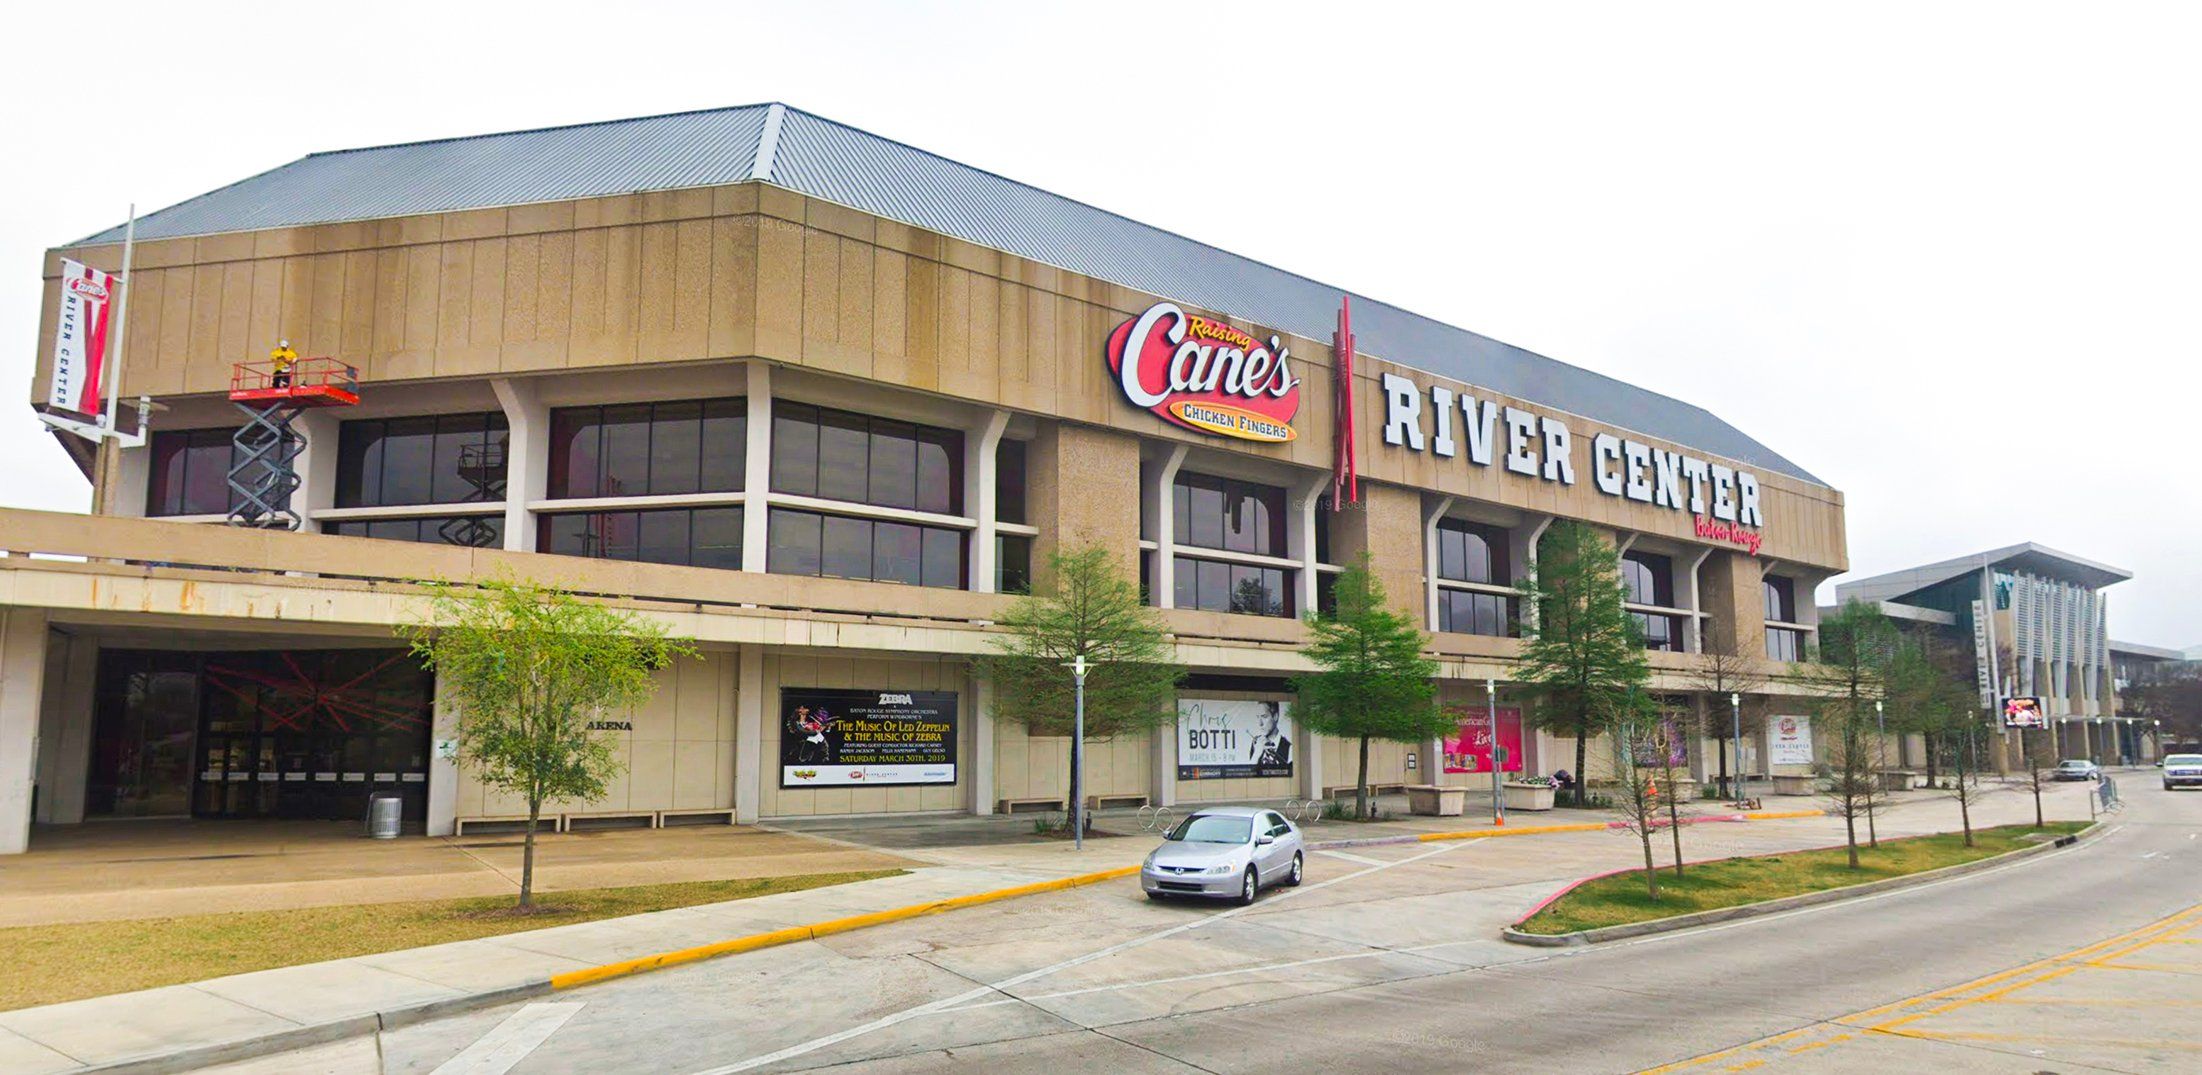 New Baton Rouge hockey team signs threeyear lease with River Center